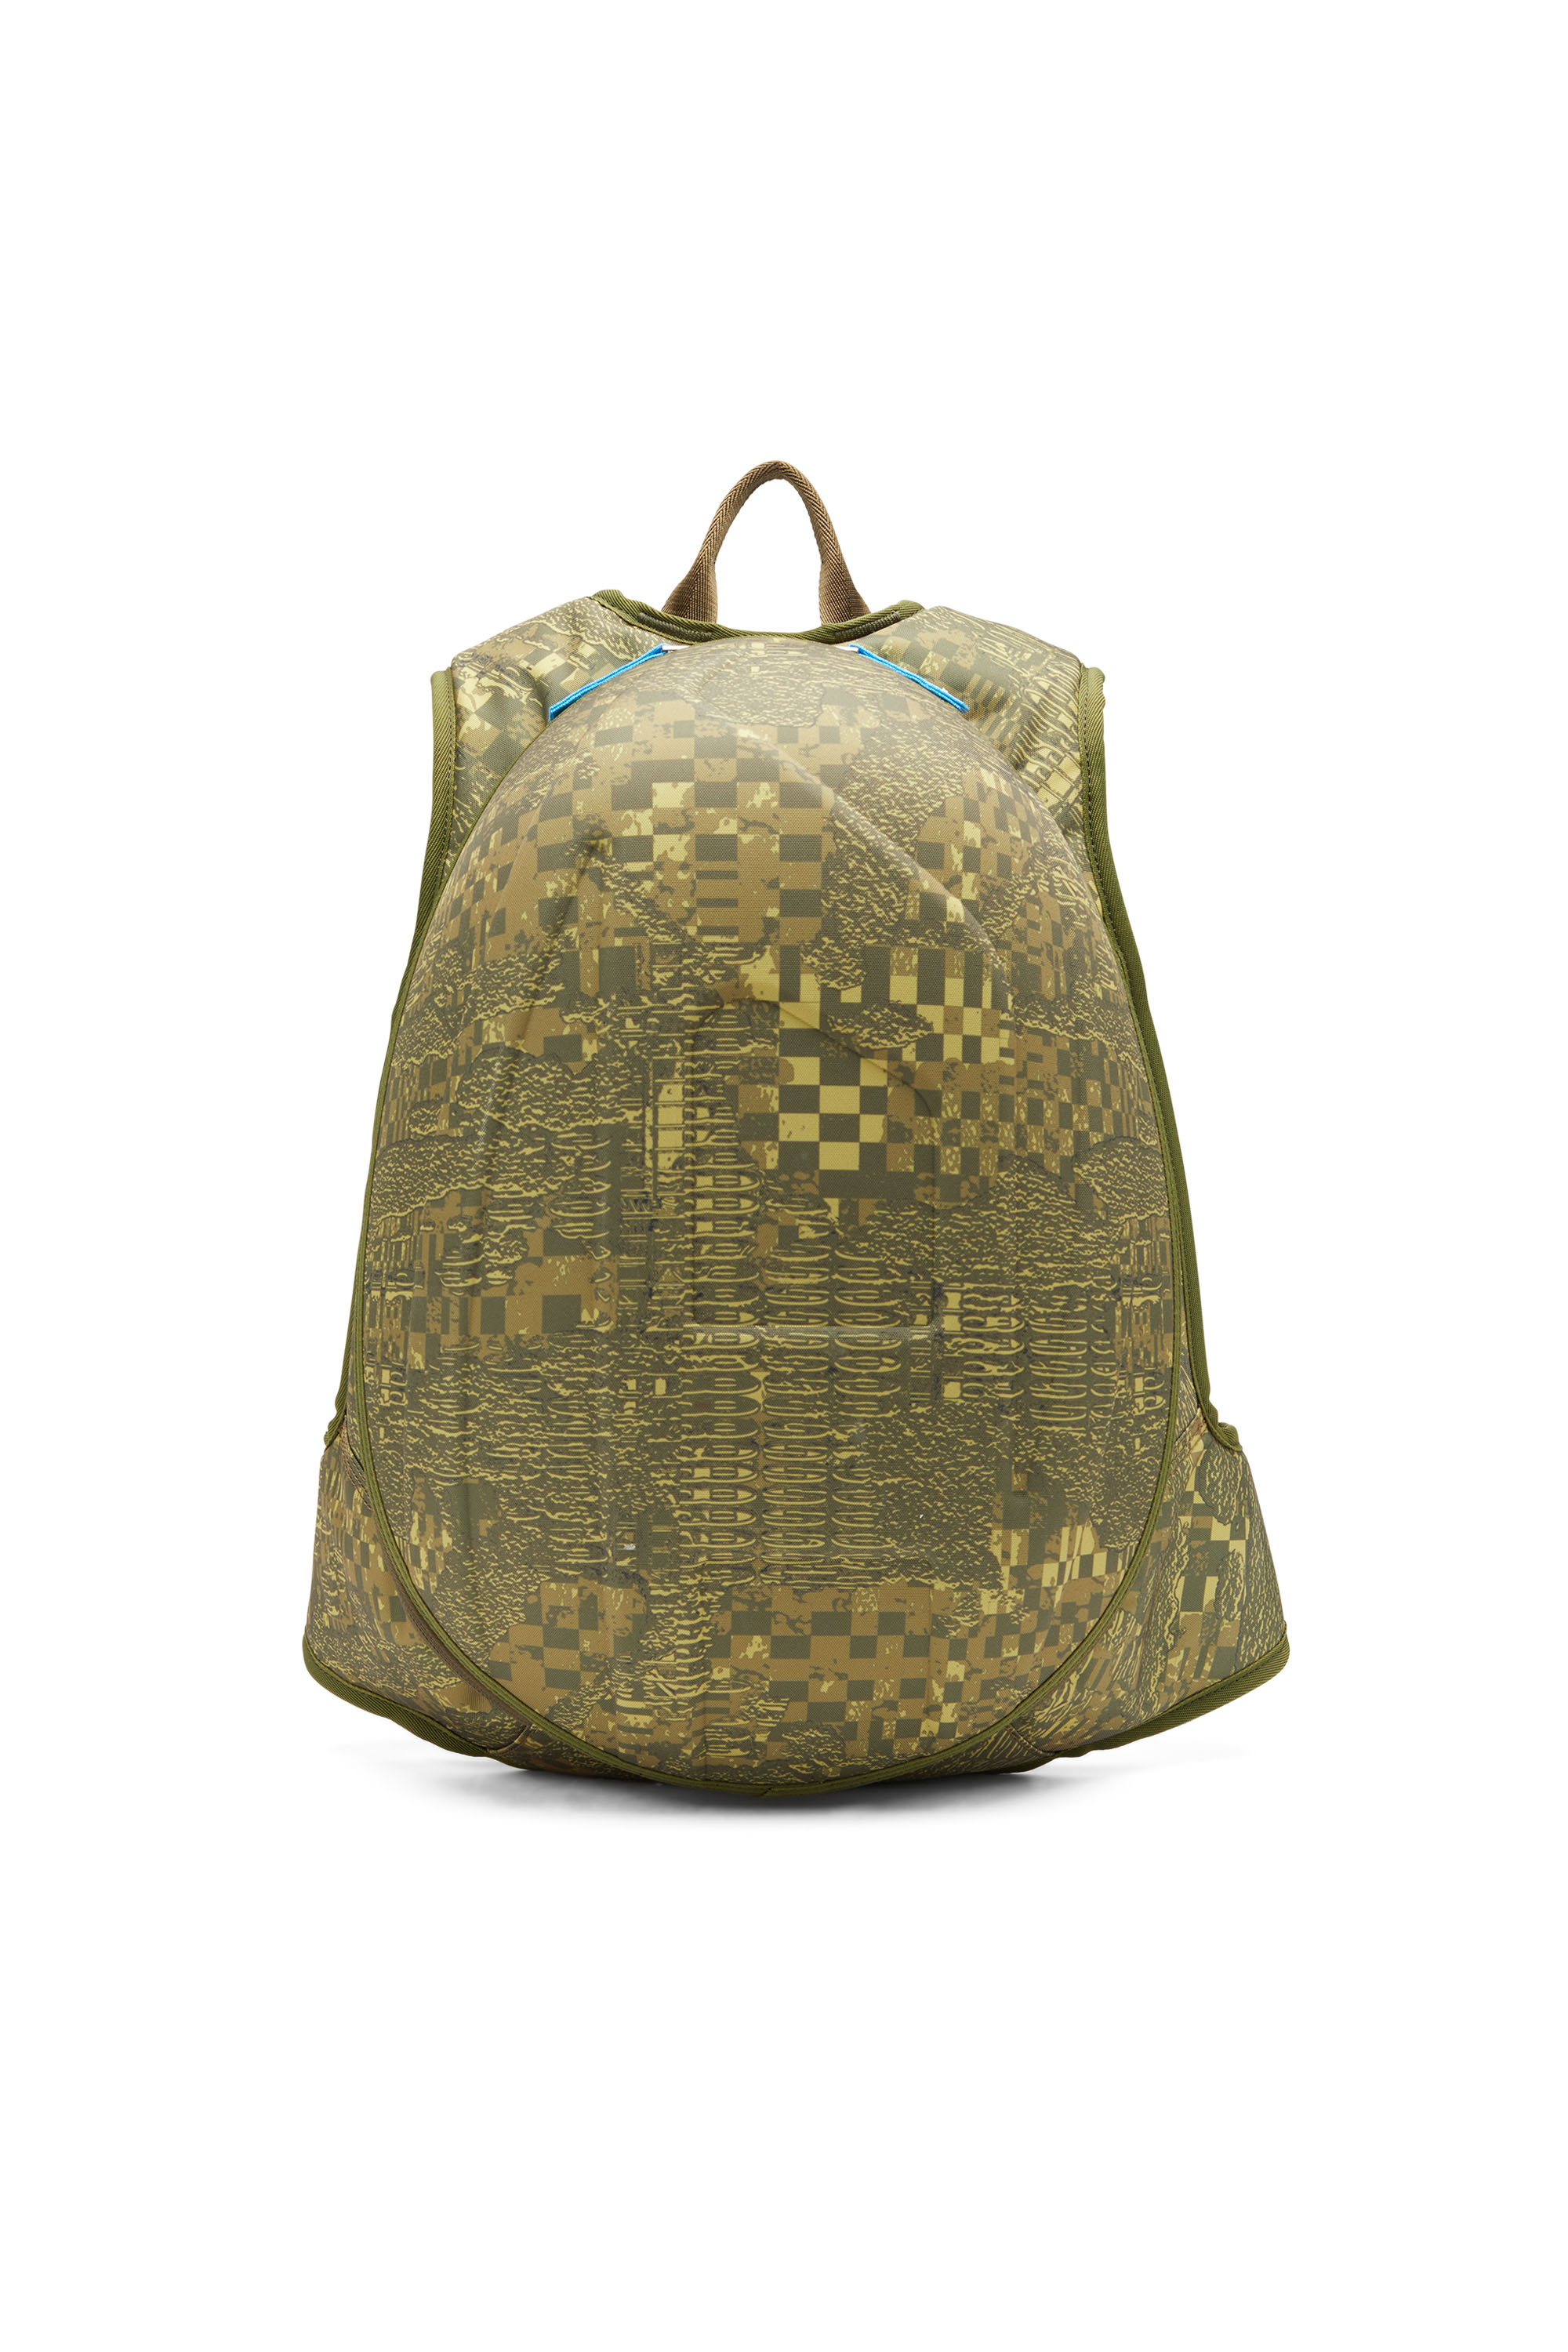 Diesel - 1DR-POD BACKPACK, Man 1DR-Pod Backpack - Hard shell backpack with camo print in Green - Image 1